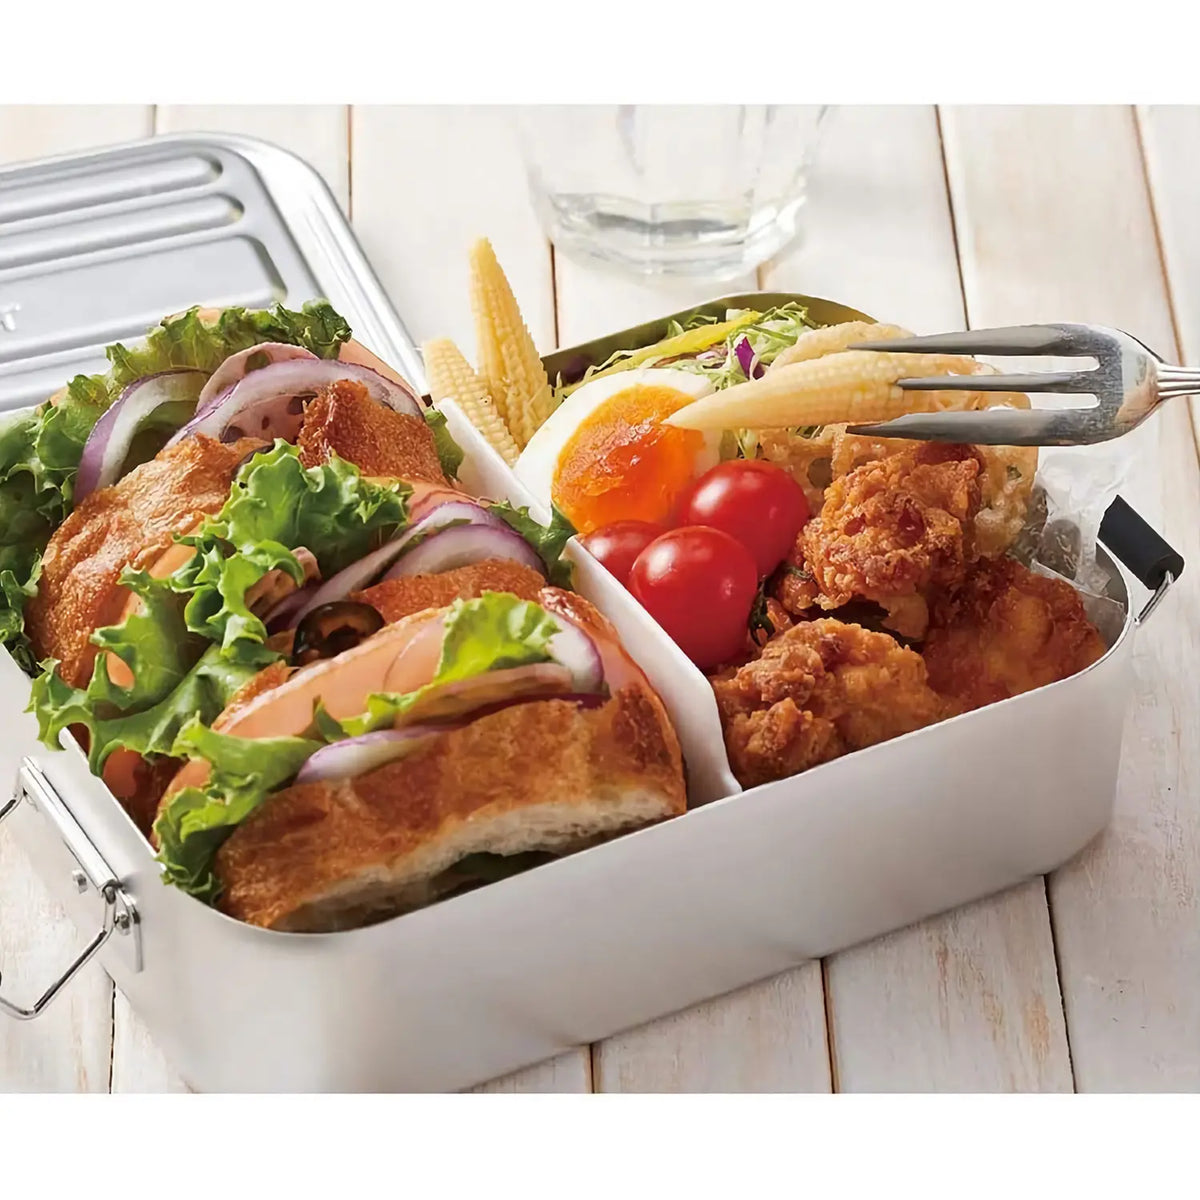 Bento Snack Box Kids Lunch Container for Kids with Inner Dividers - China  Kitchenware and Plastic Products price